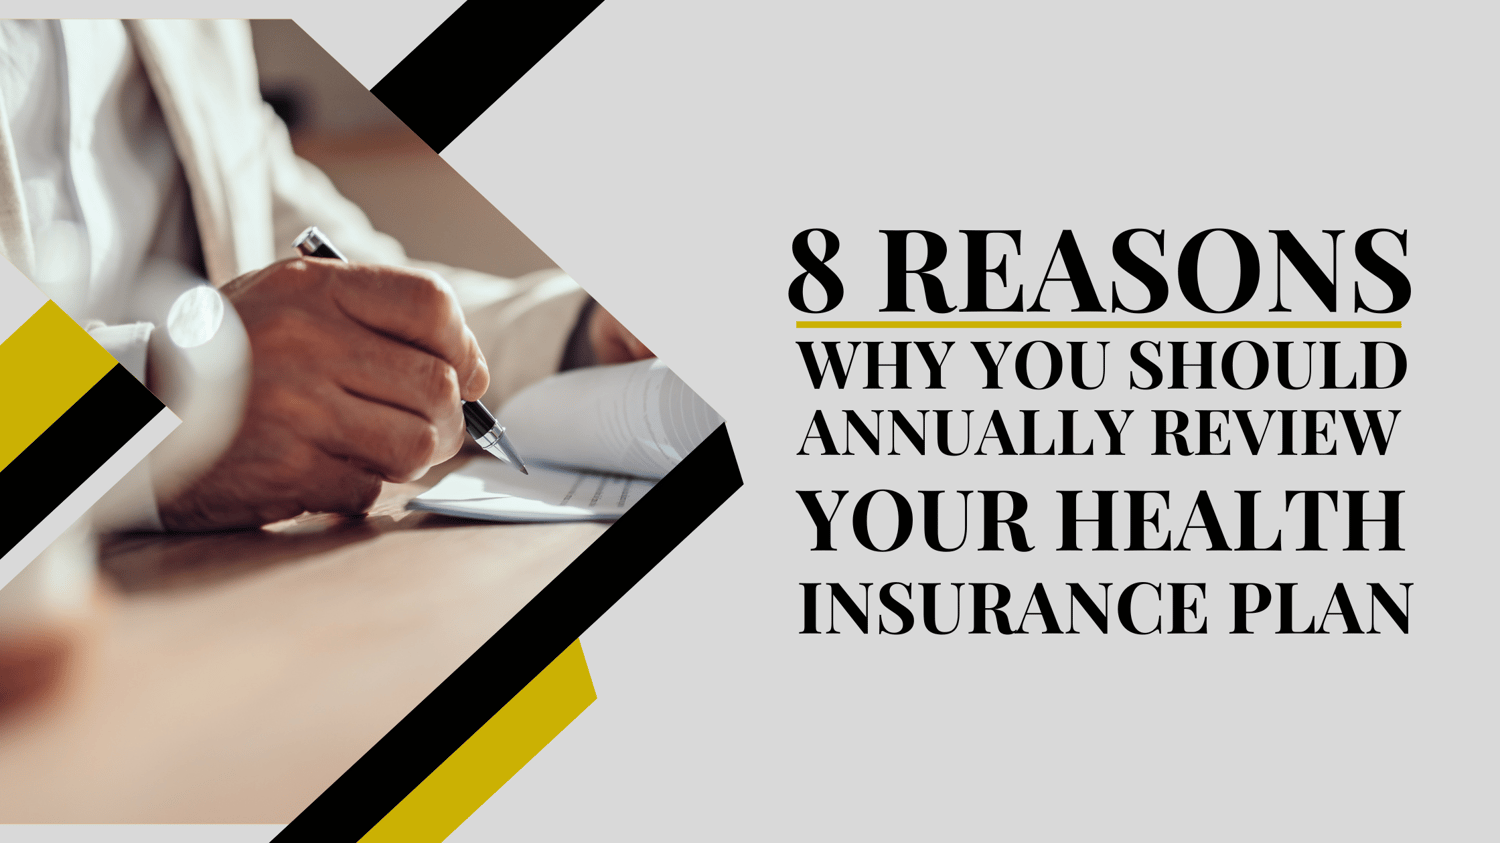 8 REASONS WHY YOU SHOULD ANNUALLY REVIEW YOUR HEALTH INSURANCE PLAN